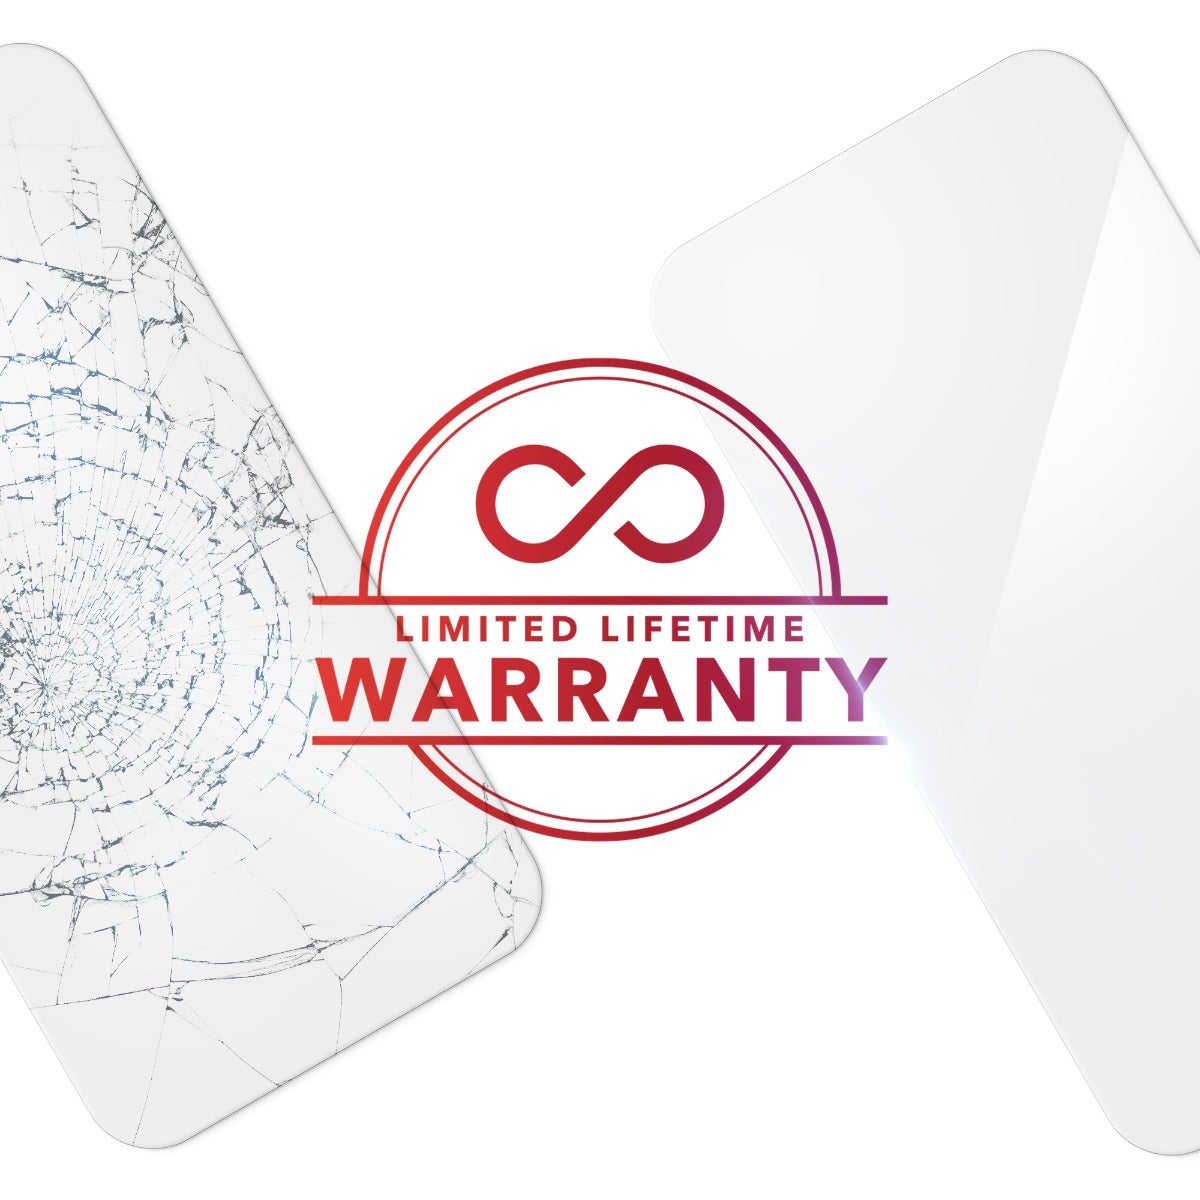 Limited Lifetime Warranty
||If your Glass Elite screen protector ever gets worn or damaged, we will replace it for as long as you own your device.